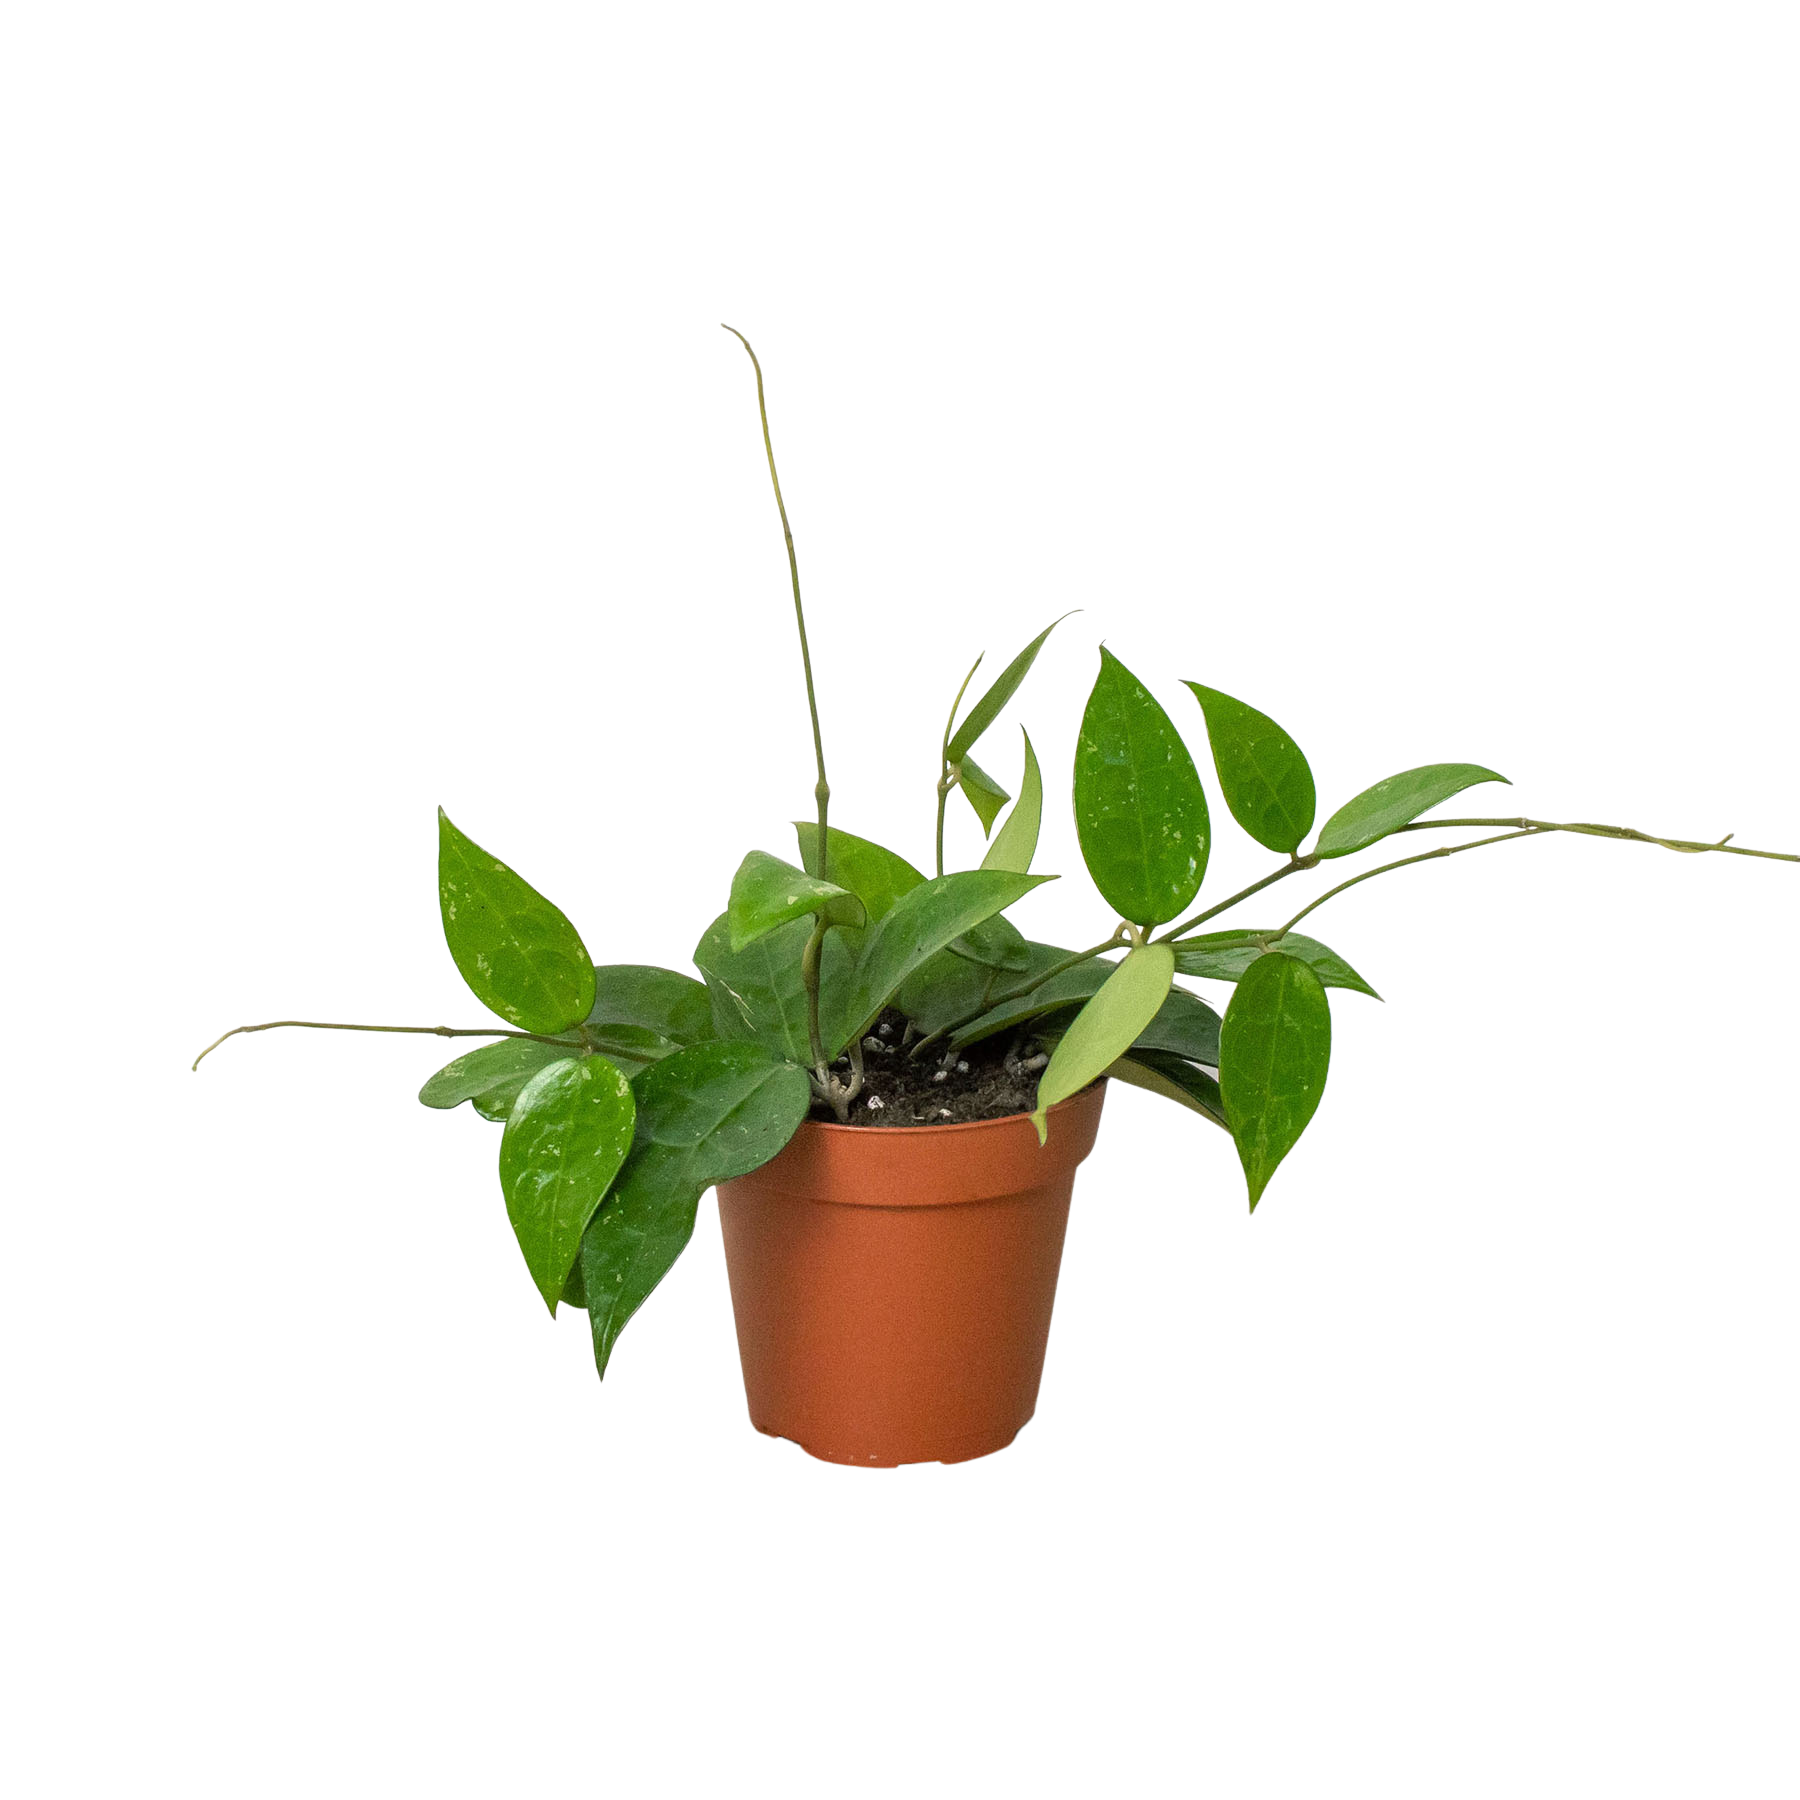 A small plant in a pot on a white background, perfect for your local garden center.